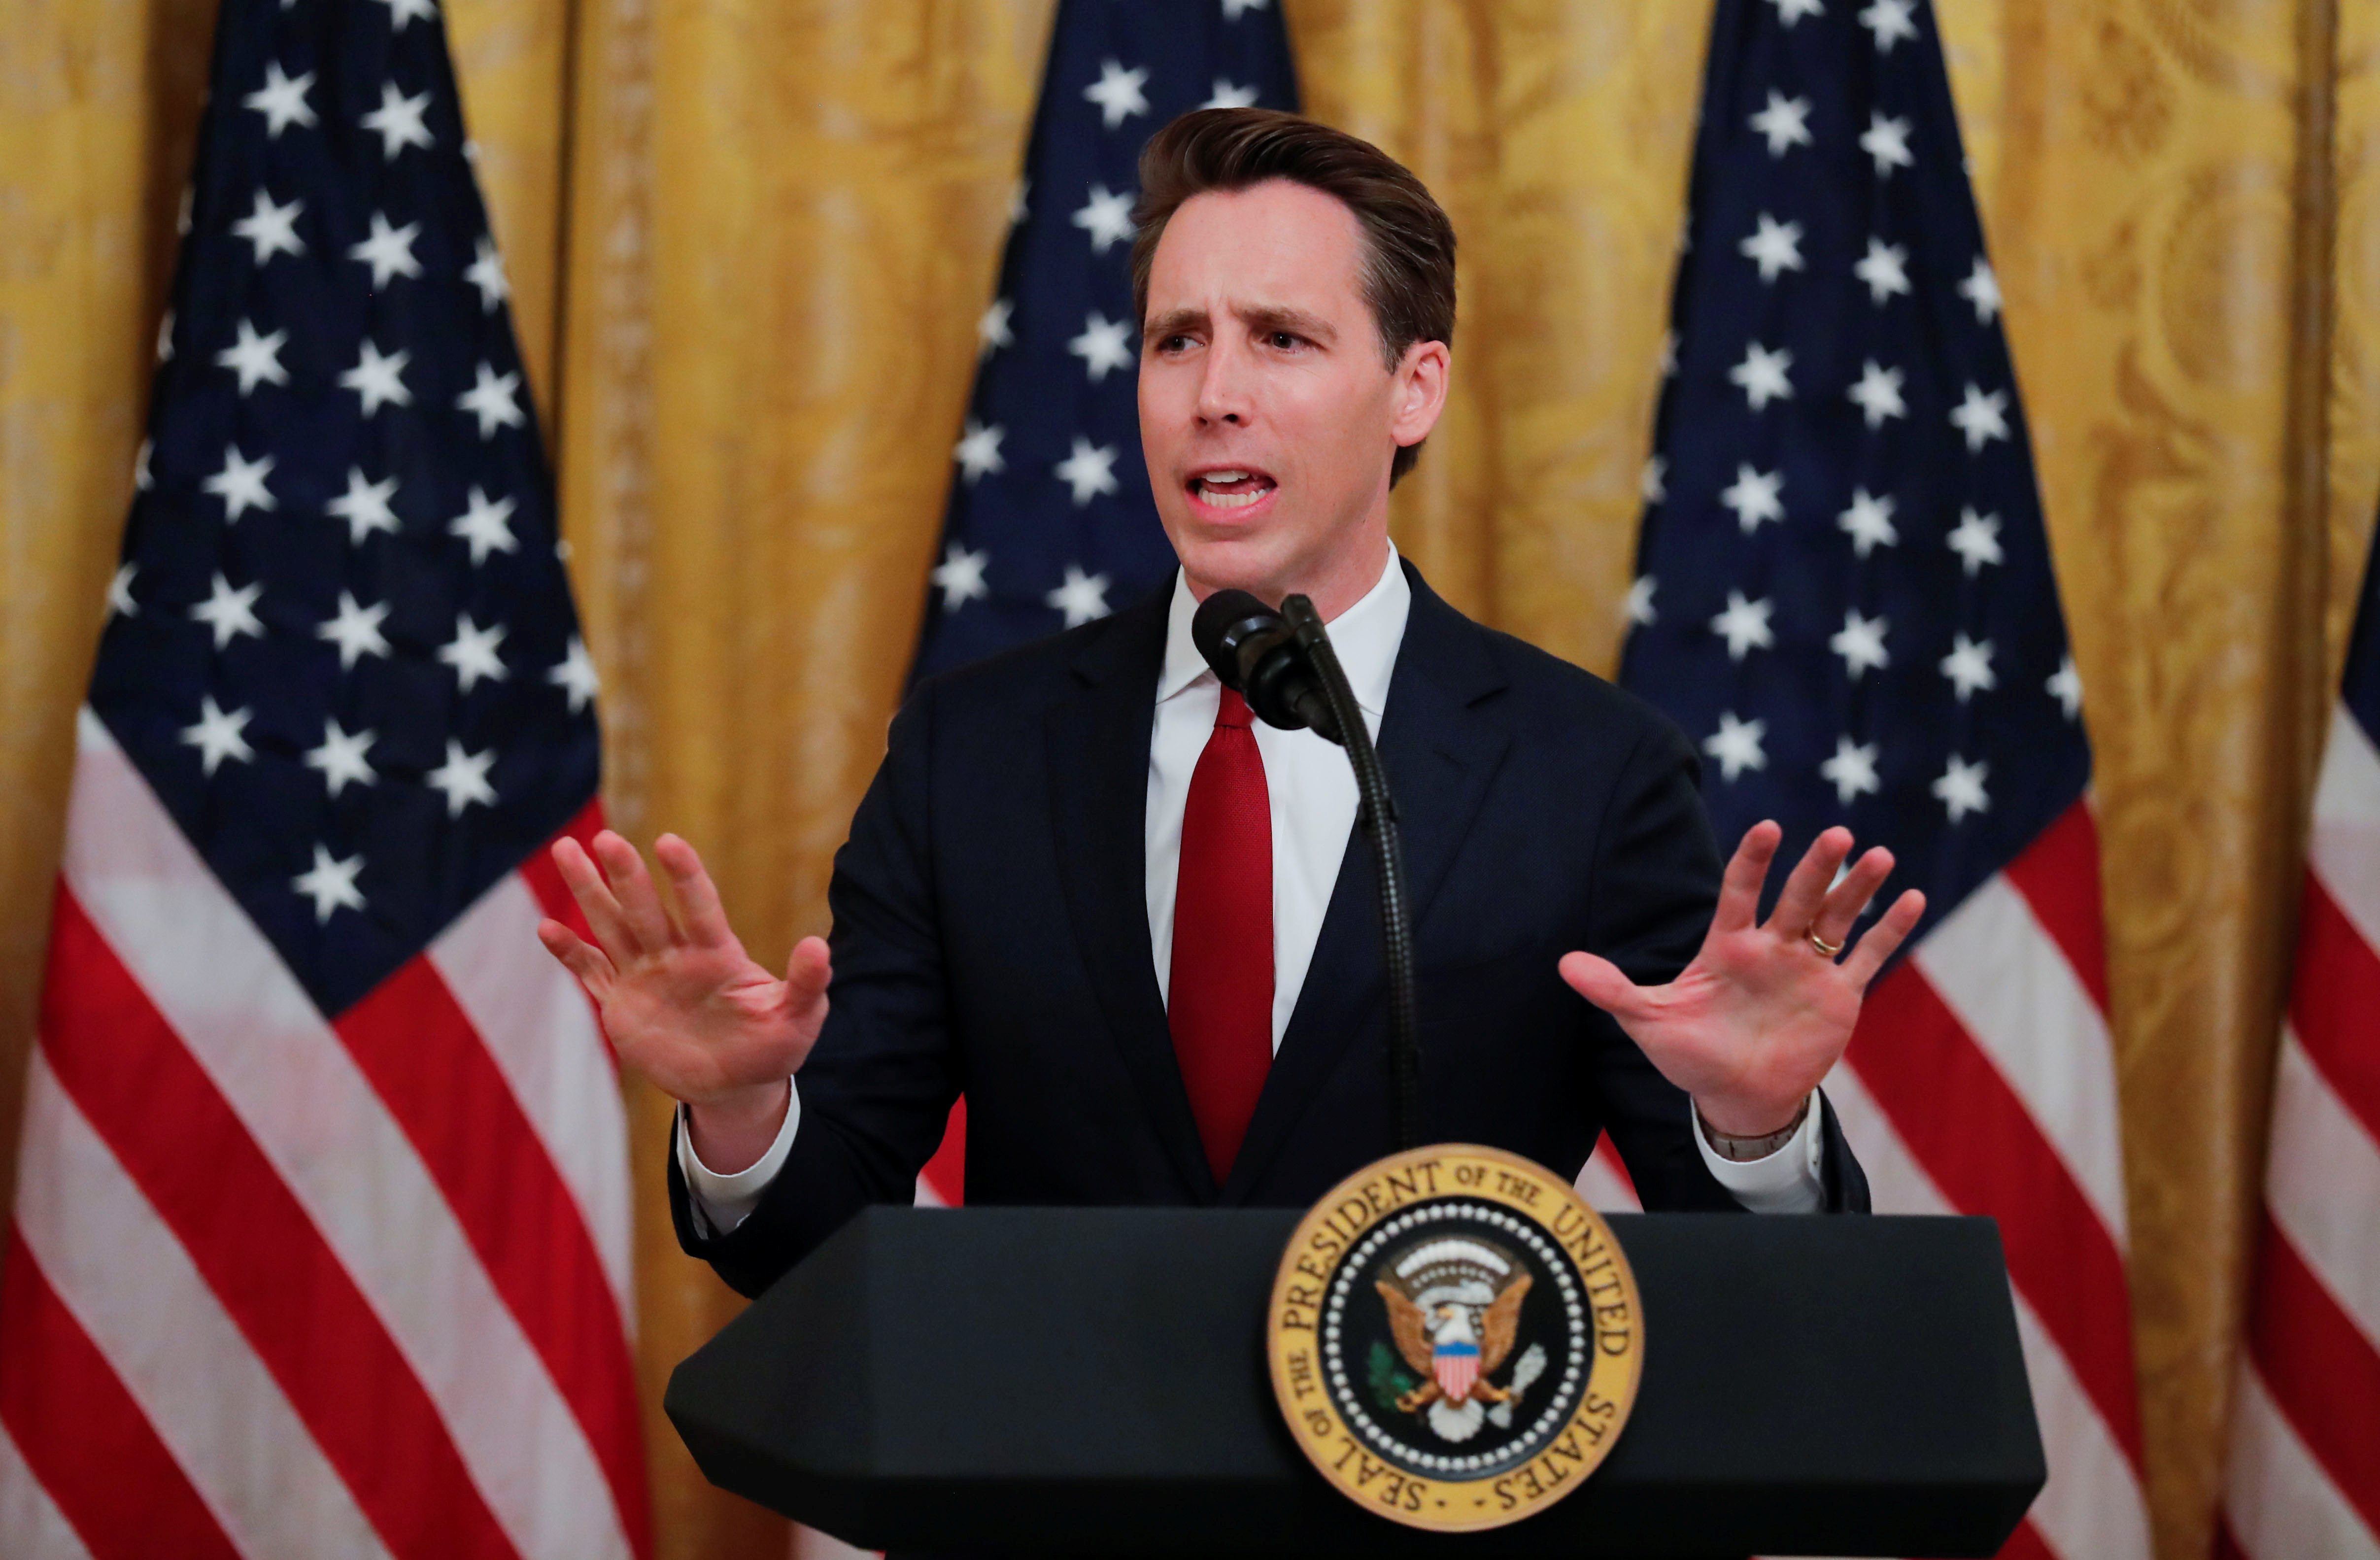 U.S. Senator Josh Hawley addresses U.S. President Donald Trump's social media summit with prominent conservative social media figures in the East Room of the White House in Washington, U.S., July 11, 2019. REUTERS/Carlos Barria